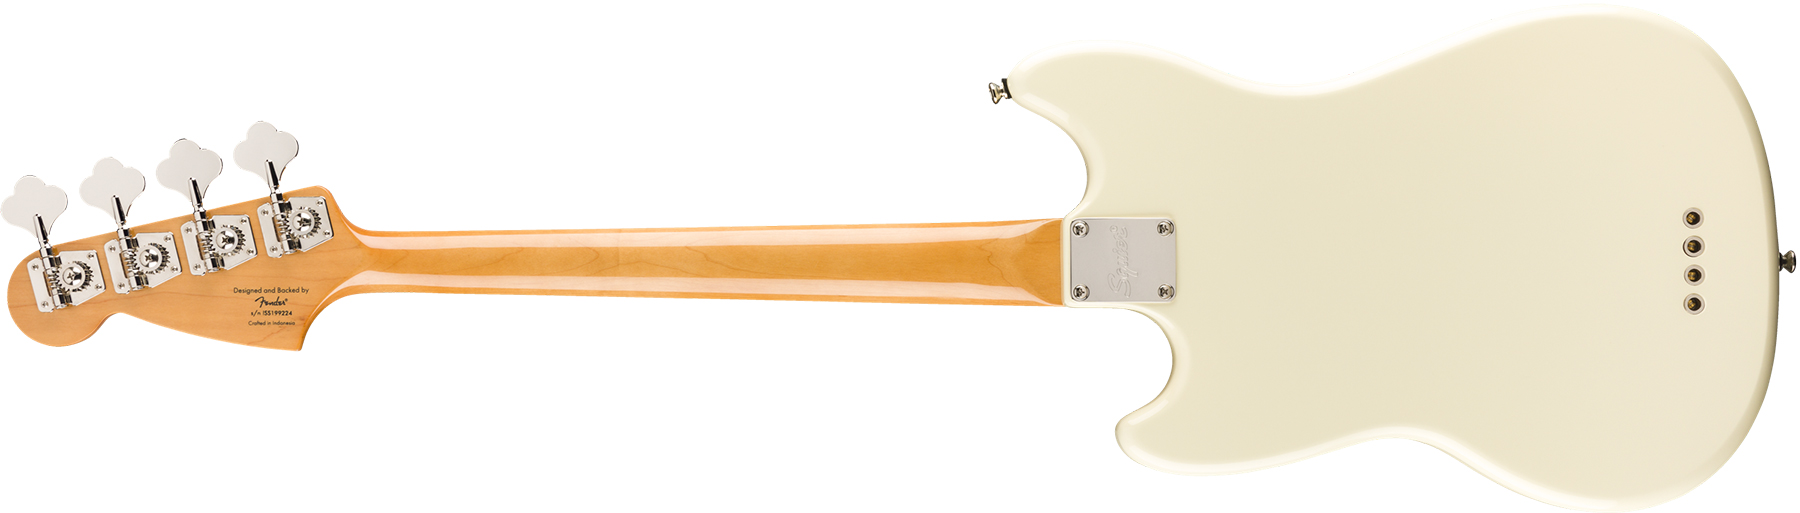 Squier Mustang Bass '60s Classic Vibe Lau 2019 - Olympic White - Solid body elektrische bas - Variation 1